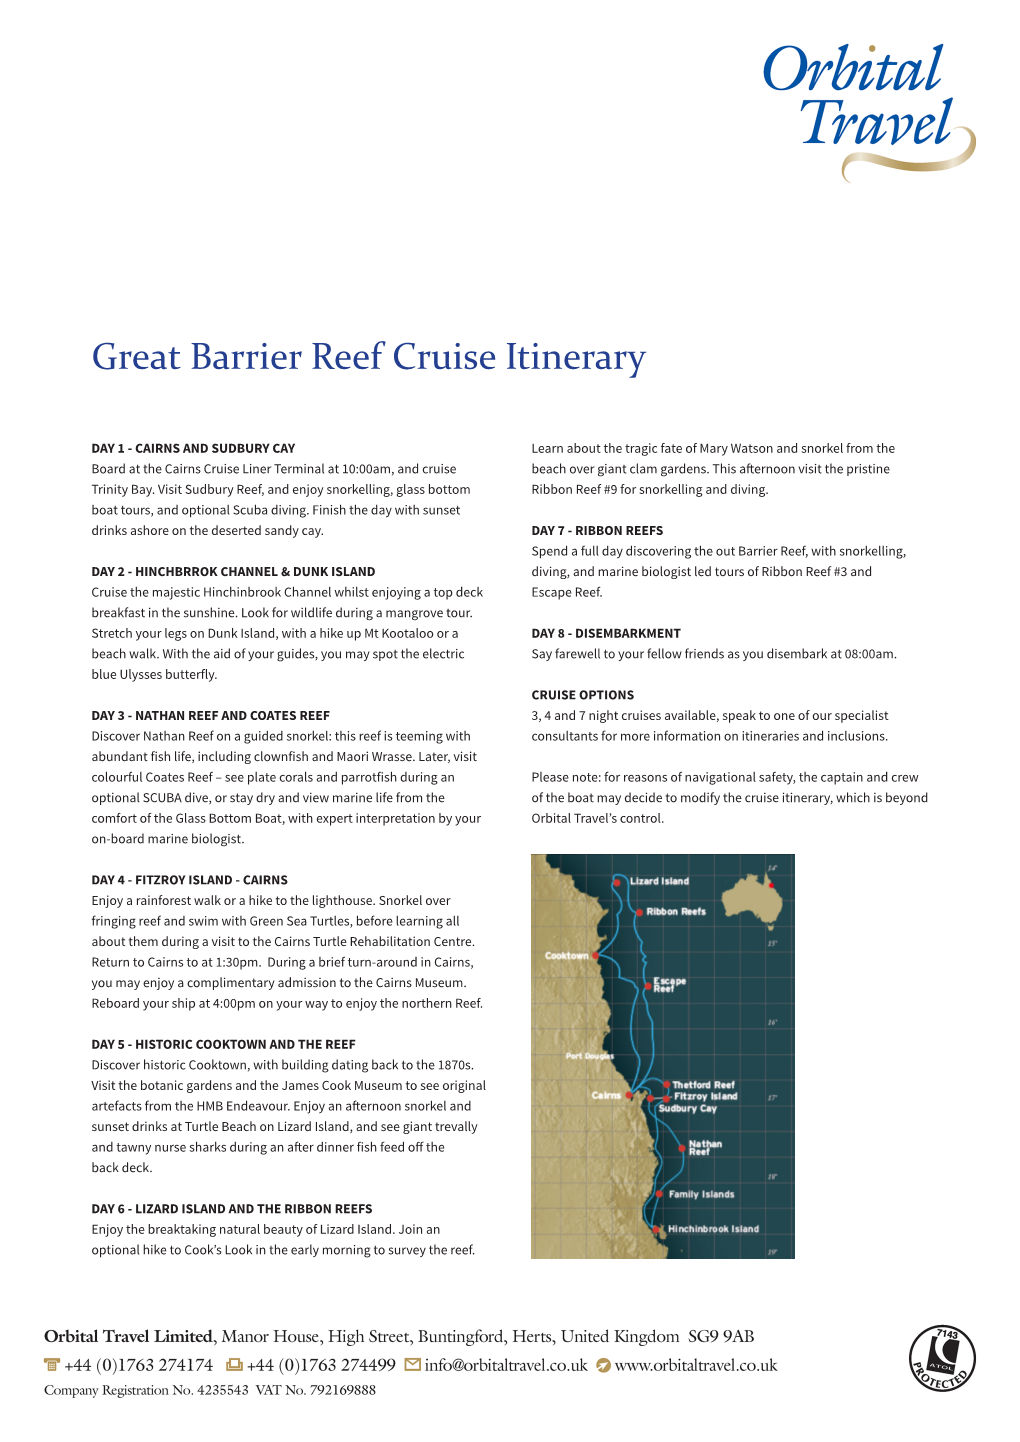 Great Barrier Reef Cruise Itinerary